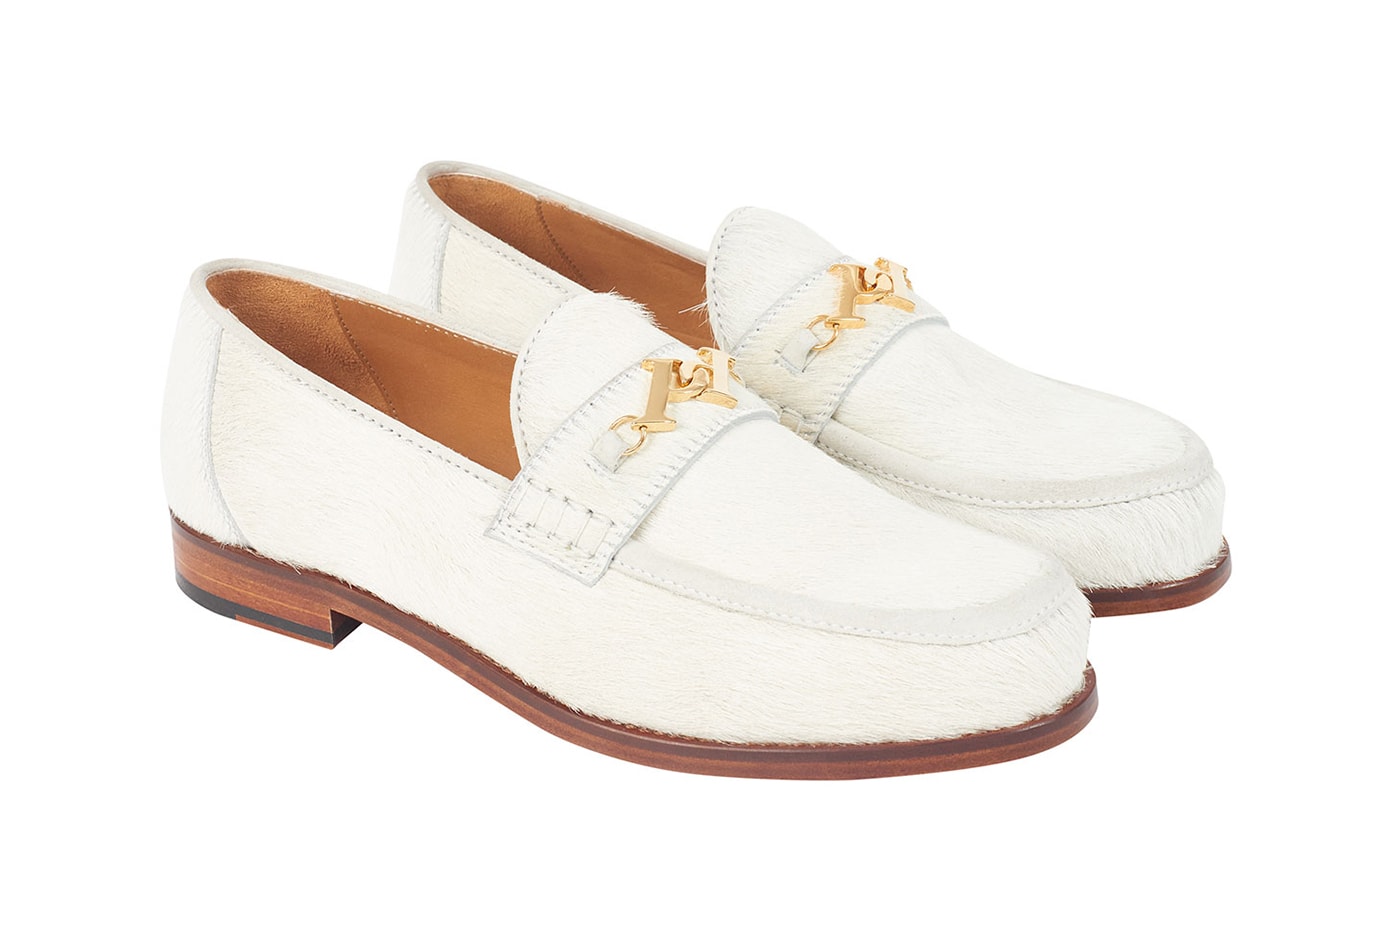 Palace 2019 Summer Footwear kickers collaboration loafer gold bit furry horsehair slip on boat shoe lug sole colorways 